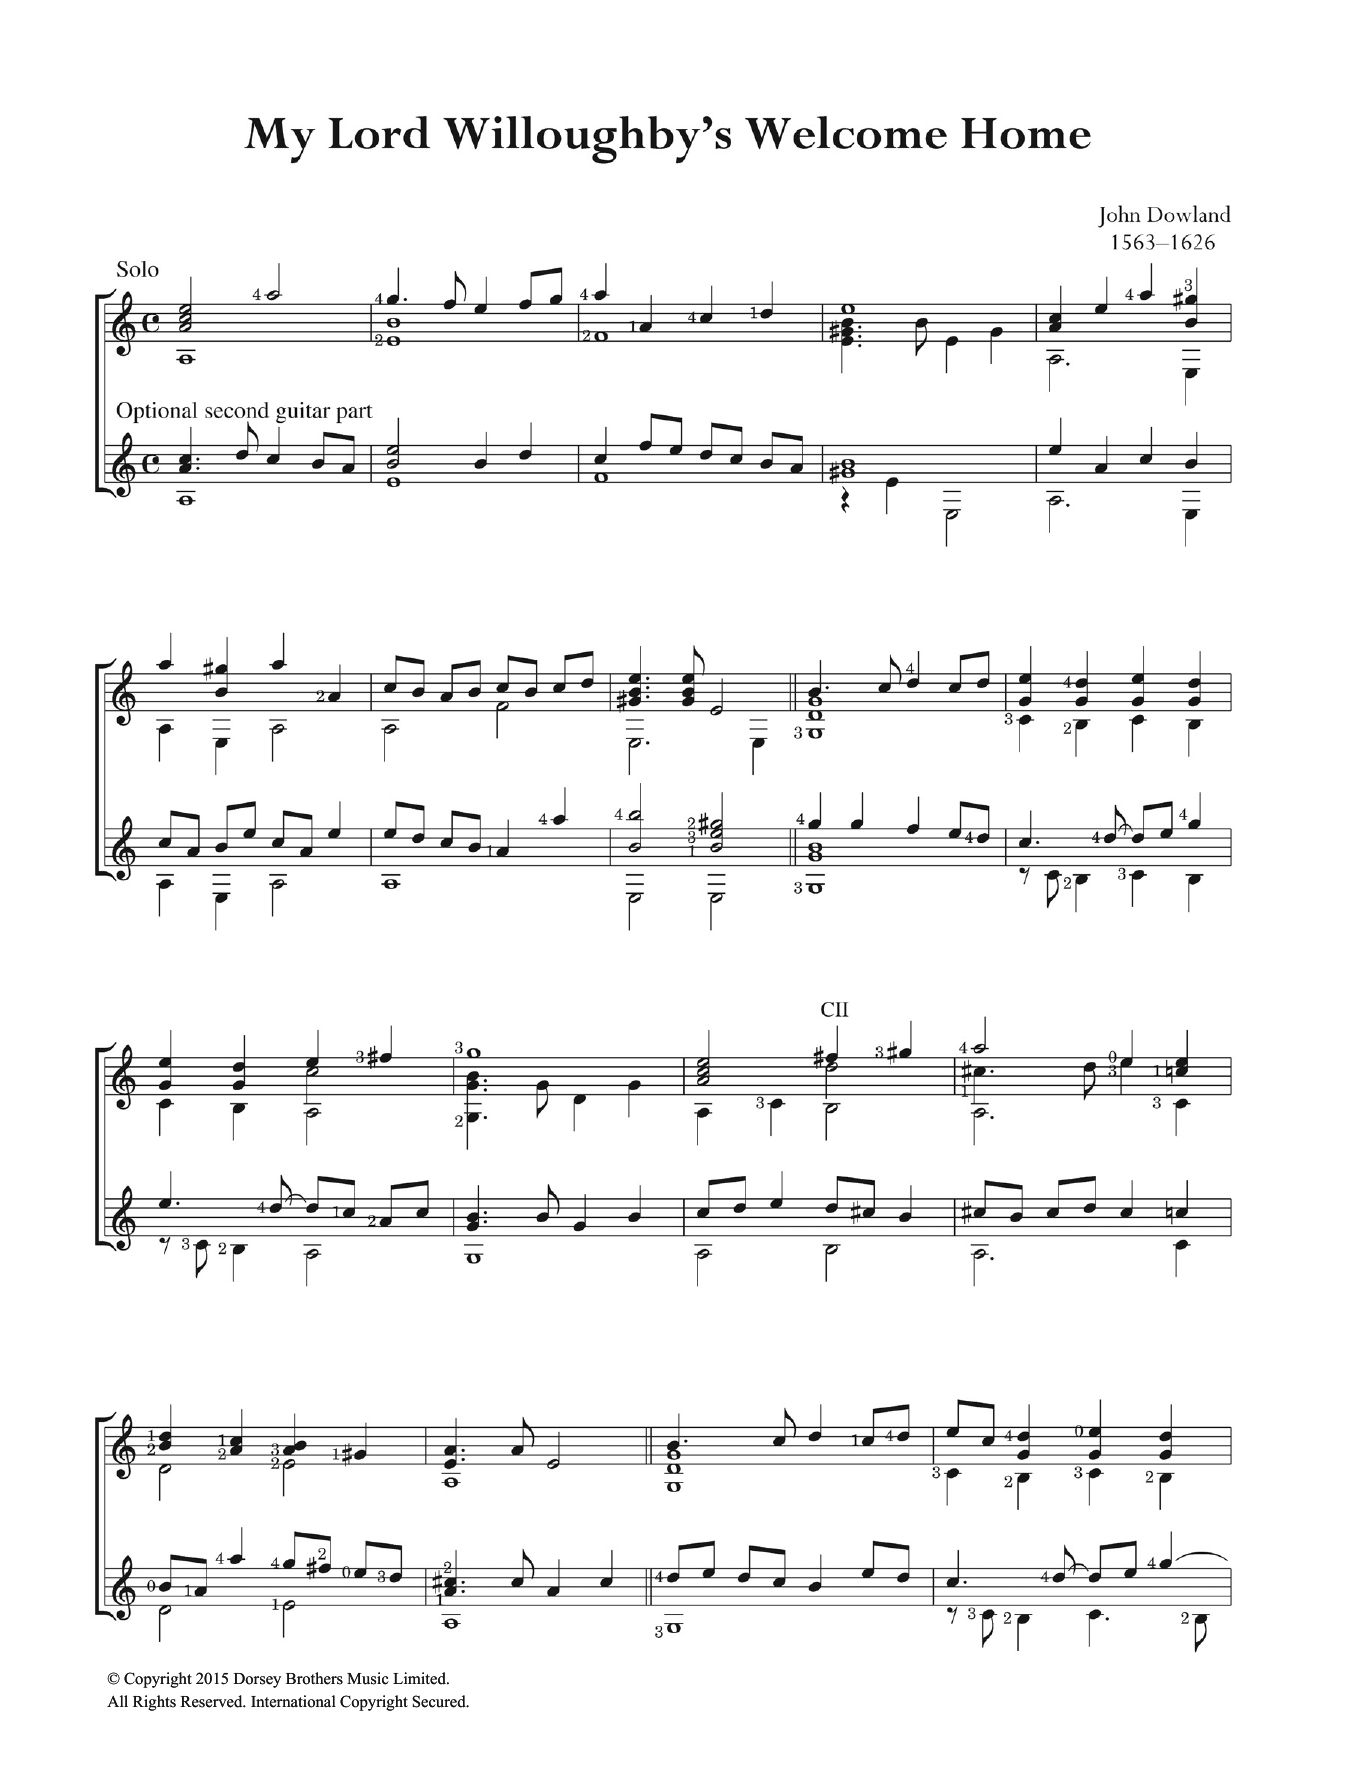 Download John Dowland My Lord Willoughby's Welcome Home Sheet Music